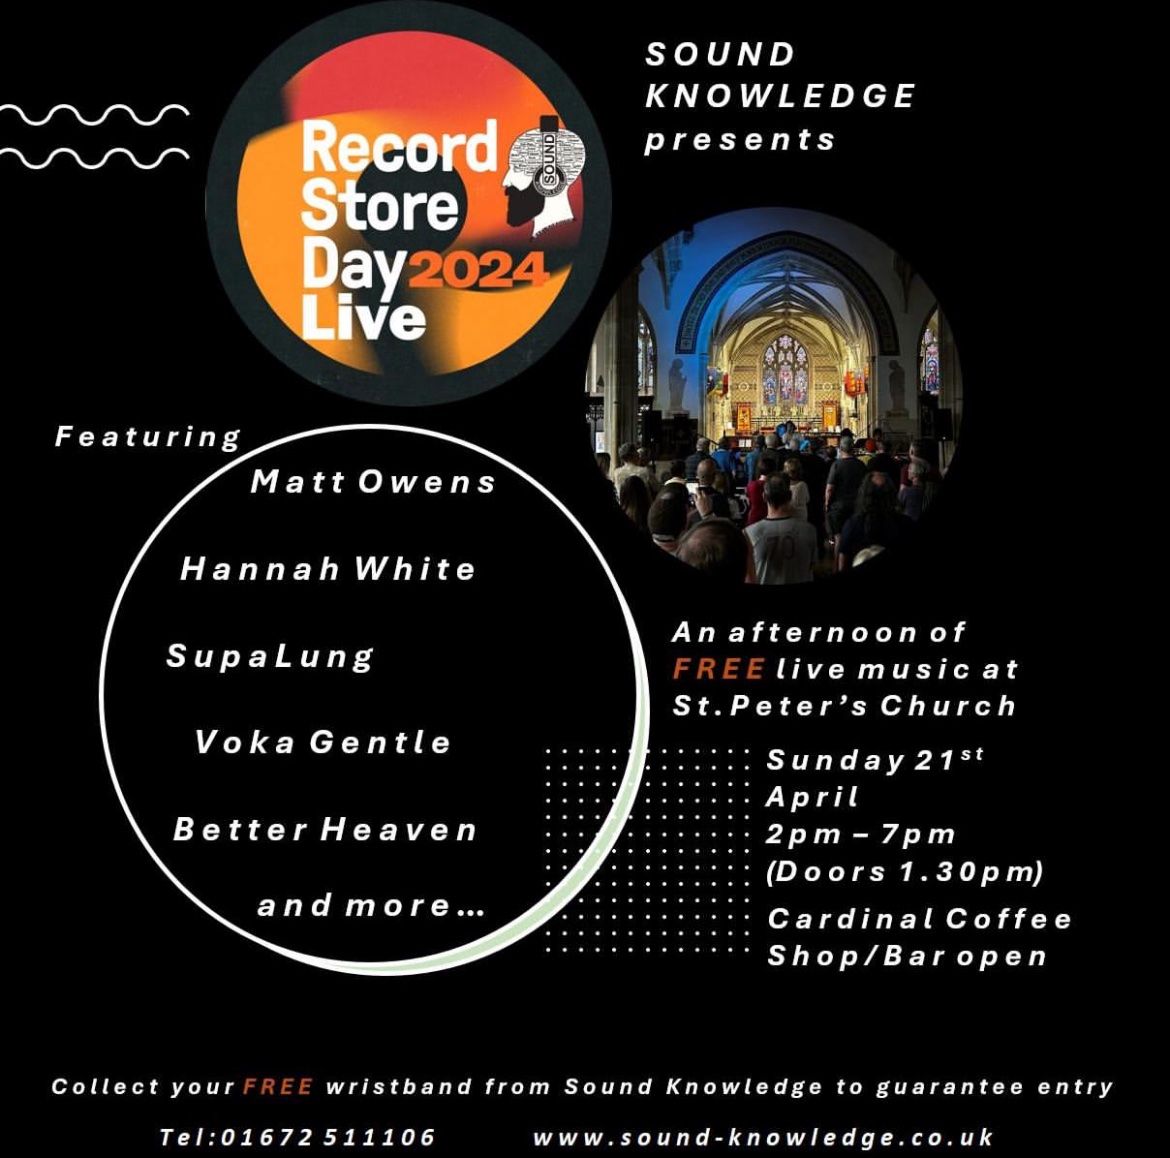 So on #RecordStoreDay I’m ecstatic to be playing with The DVP on this epic @SoundKnowledge_ event 4 a #FREE IN! Always stoked to be on the bill with @songsbyhannah & @wearesupalung & loads more great acts besides! @americanaUK #marlborough @SongwritingMag @thegrapesbath